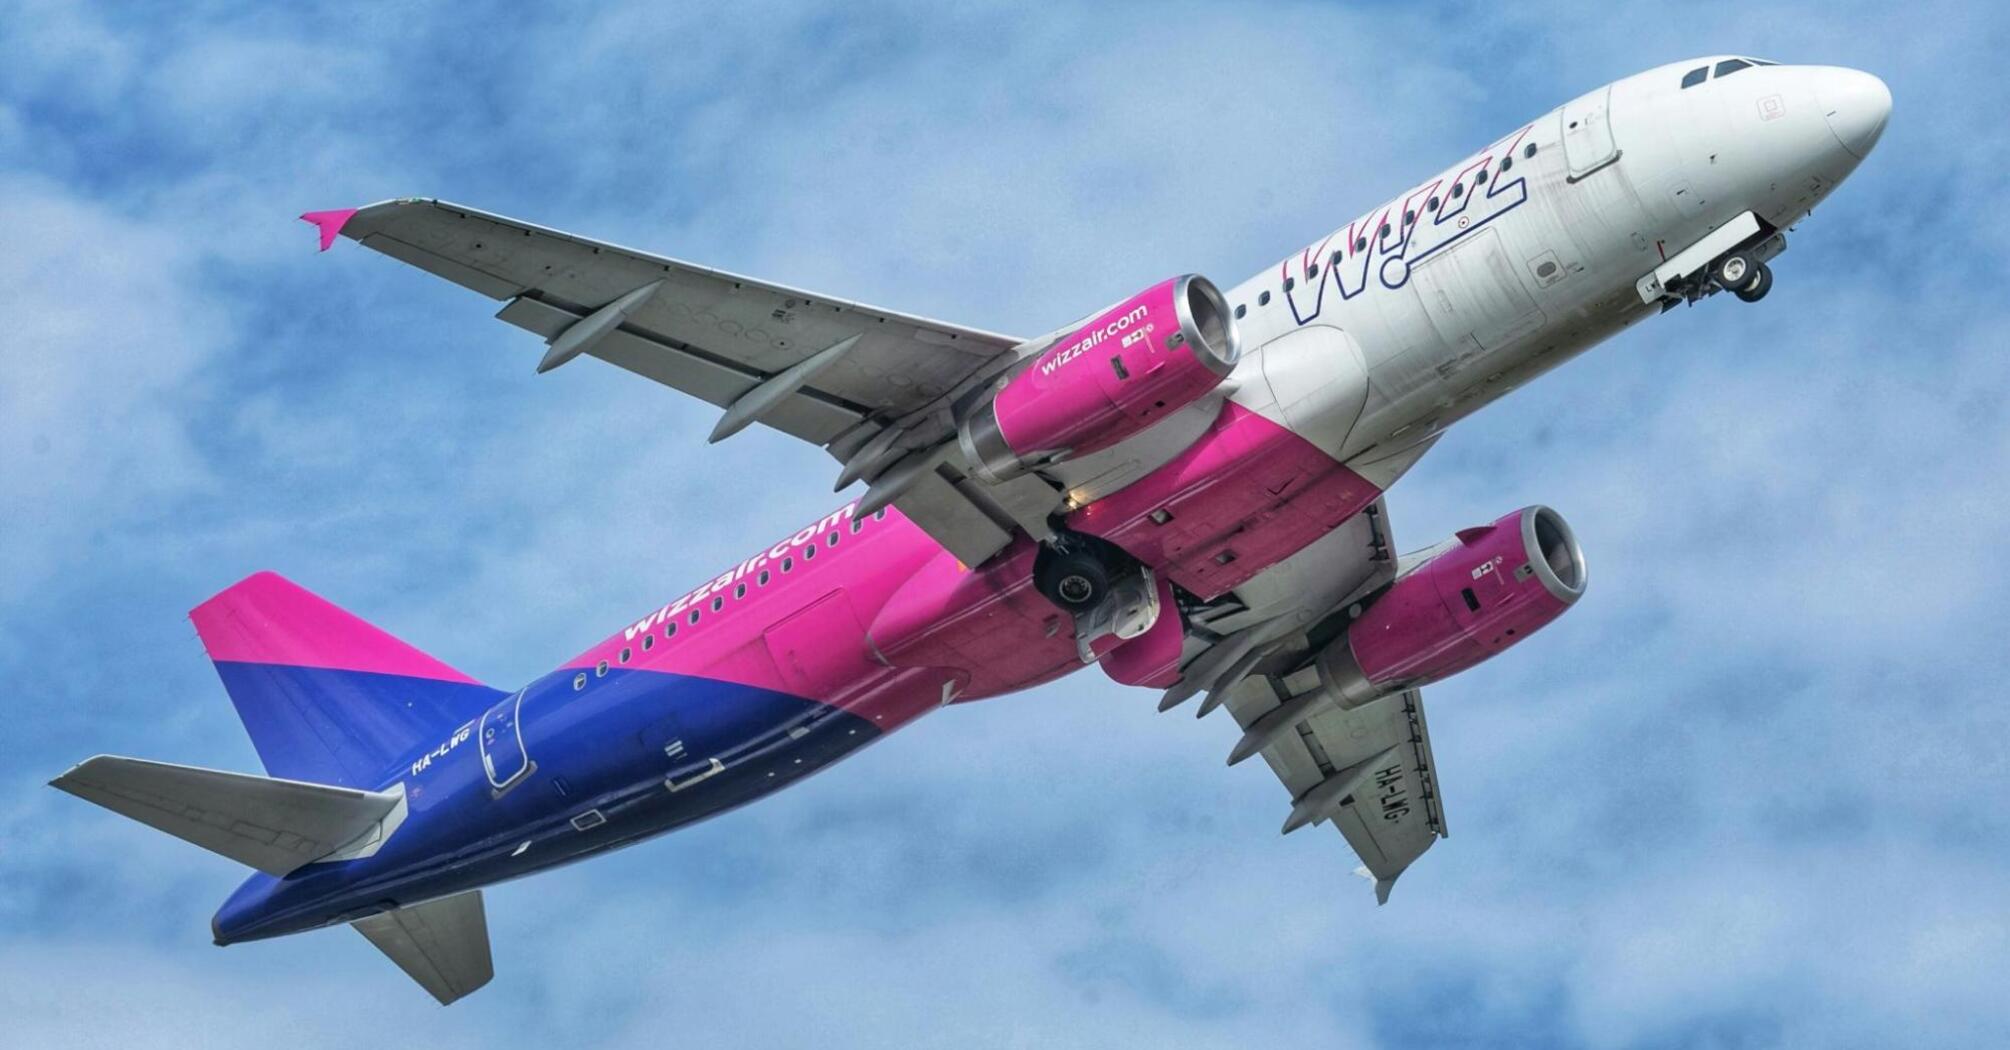 A pink and blue Wizz Air jet airliner in the sky